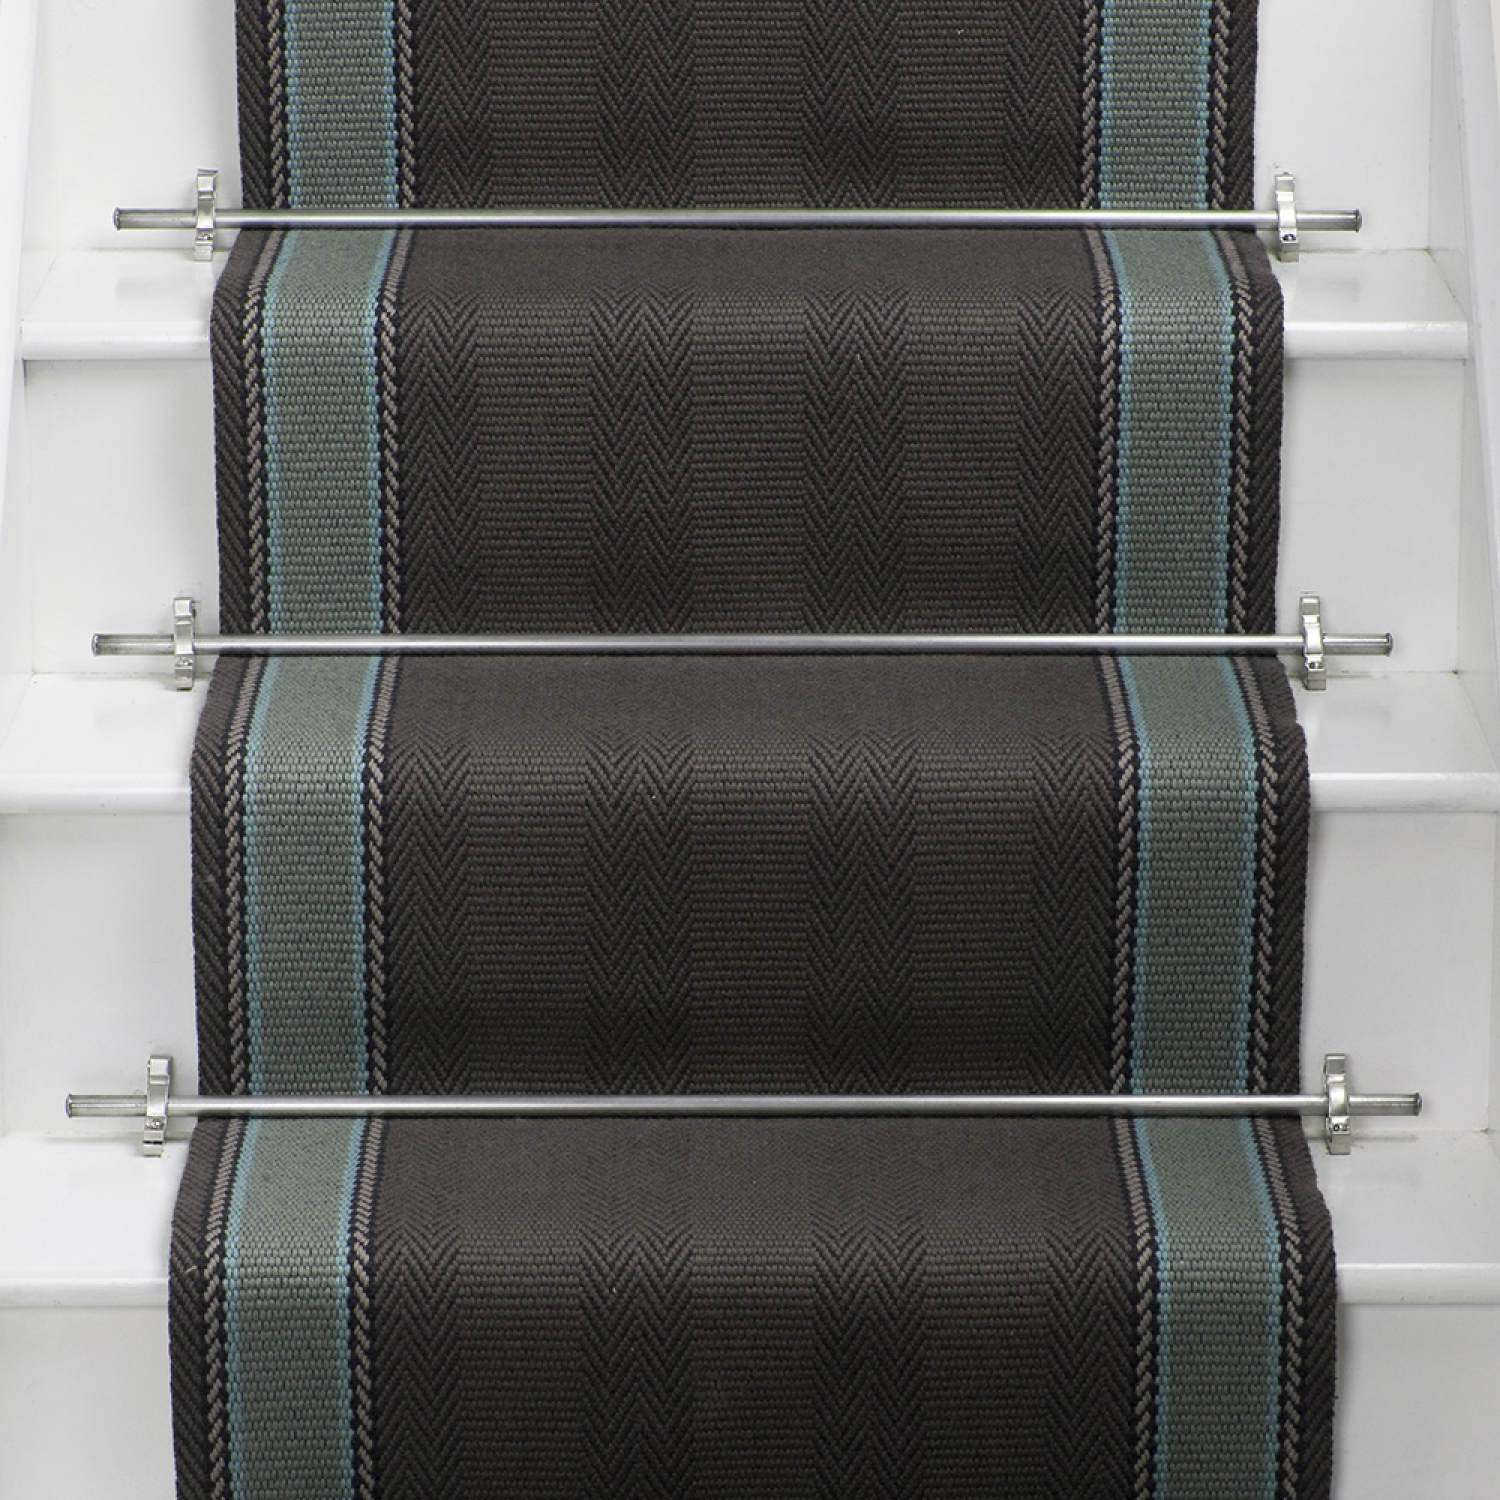 Henley Willow stair runner by Roger Oates